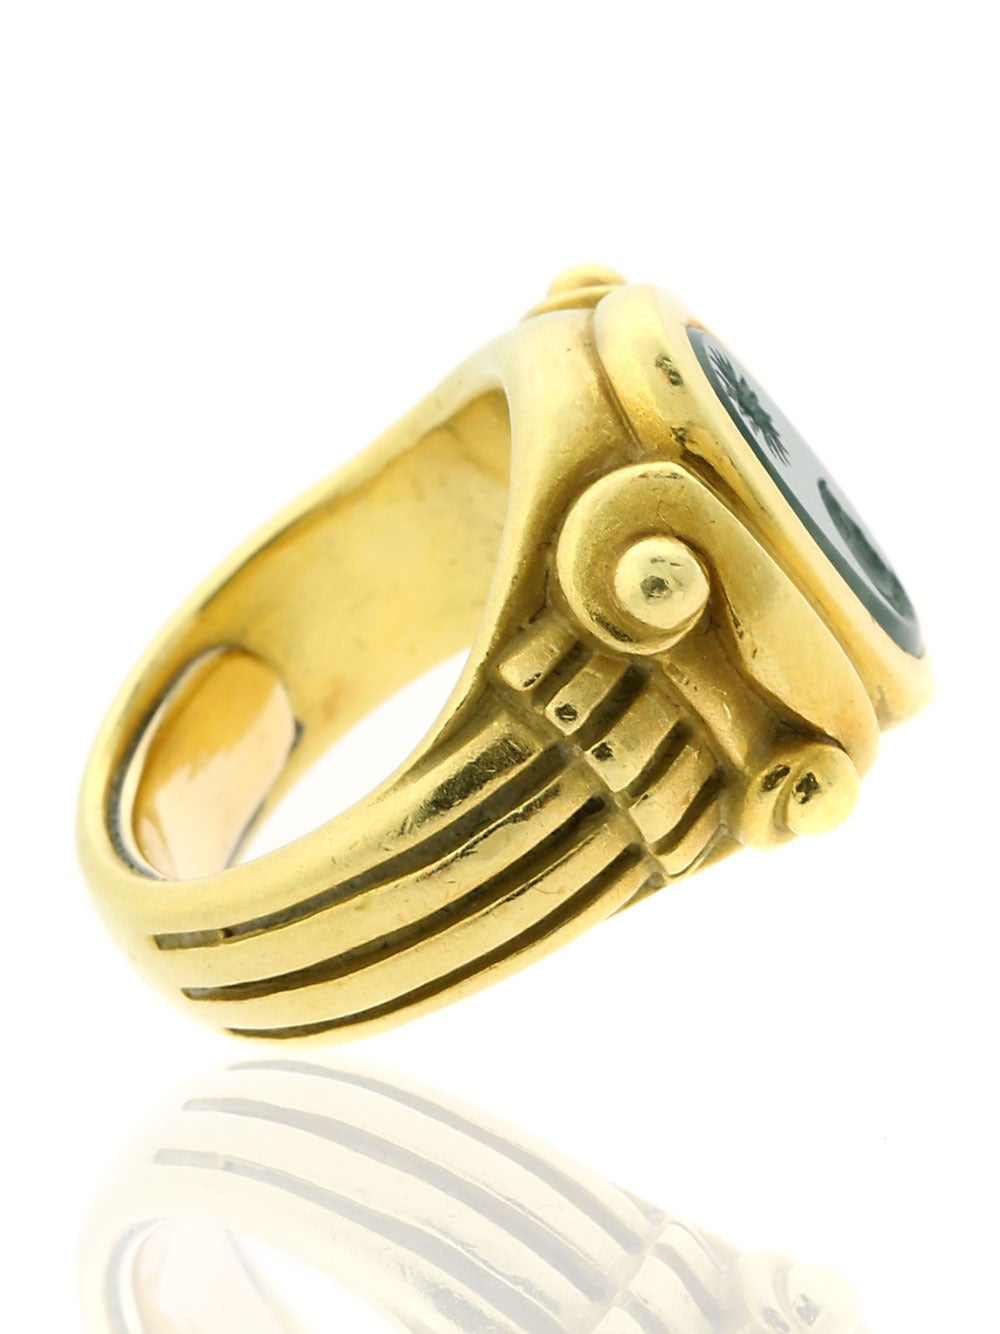 A unique ring by Kieselstein Cord featuring a hand carved bloodstone crafted in 18k Yellow Gold. The ring has a length of 14mm, Sz 3 (Resizeable), and has a total weight of 17.2 grams.